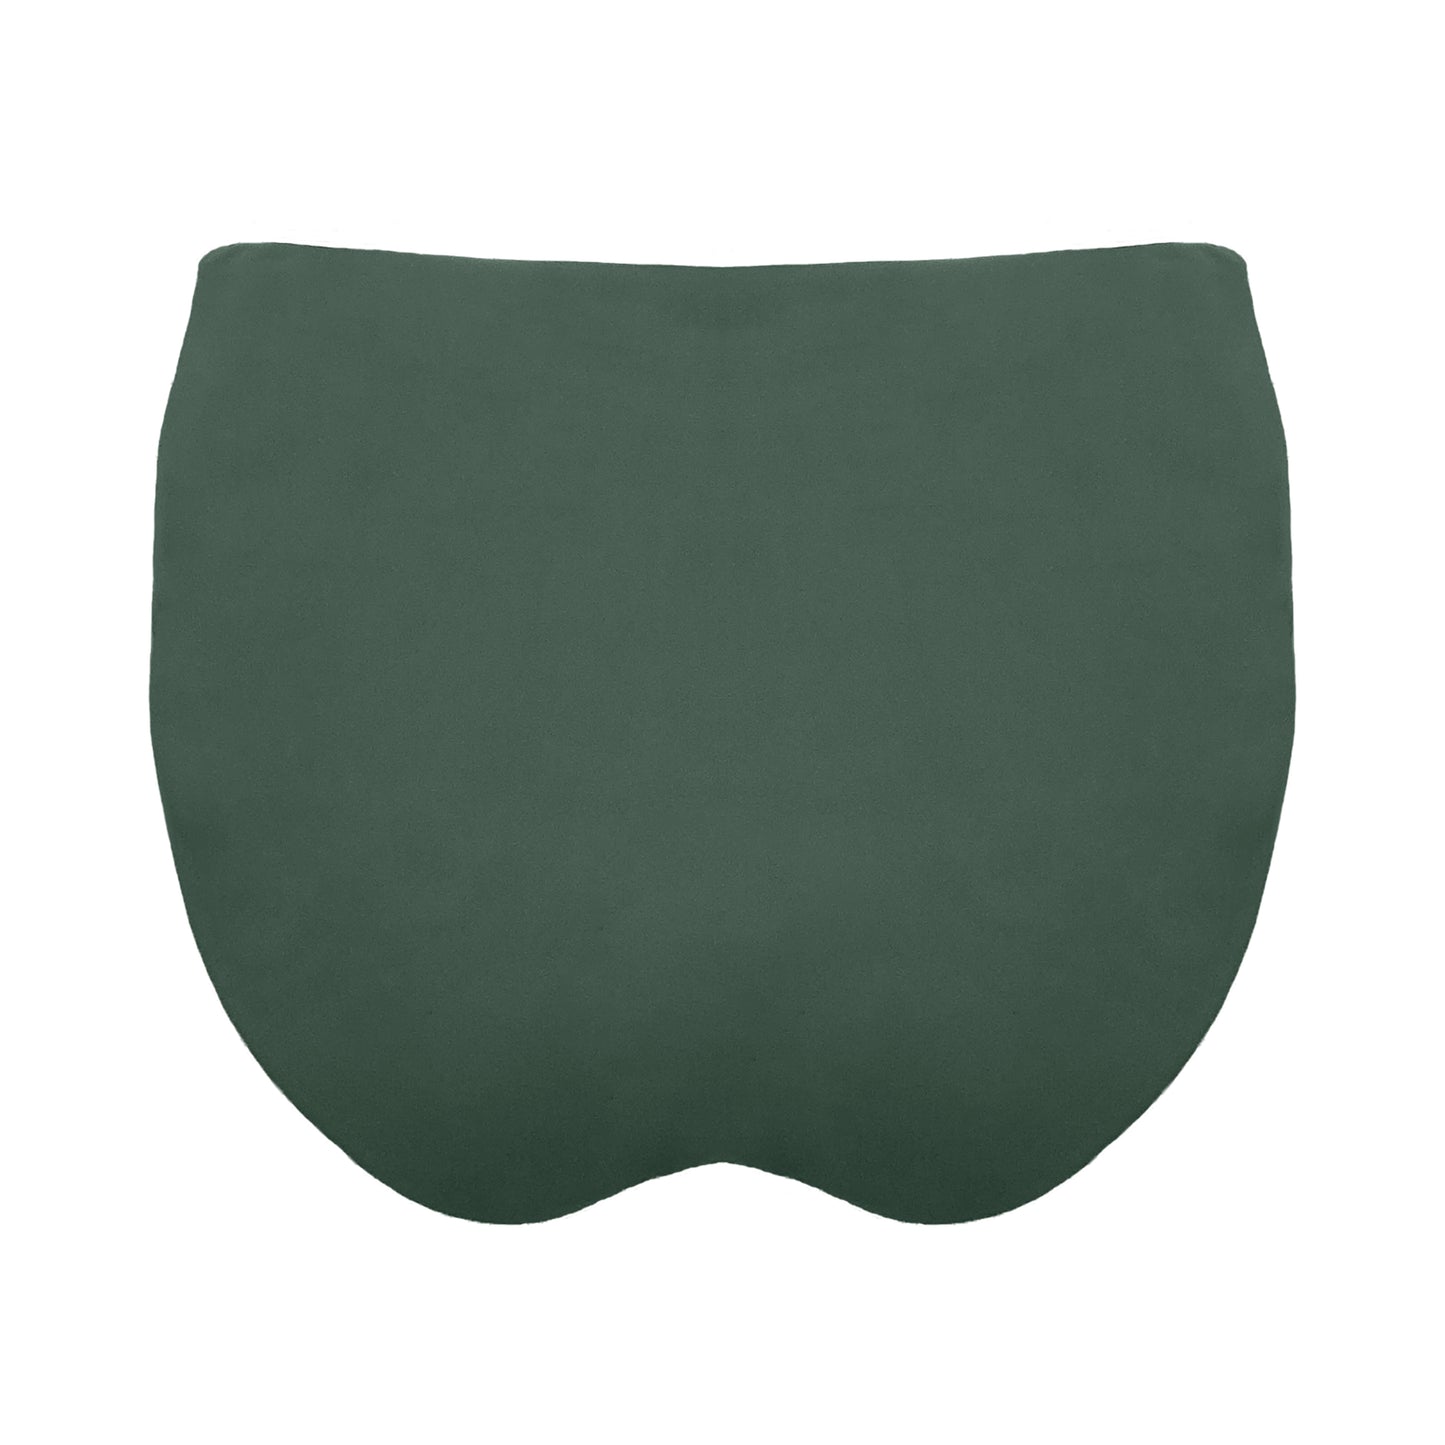 Back view of sage green Mid rise bikini bottom with cheeky coverage and wide gathered sides.